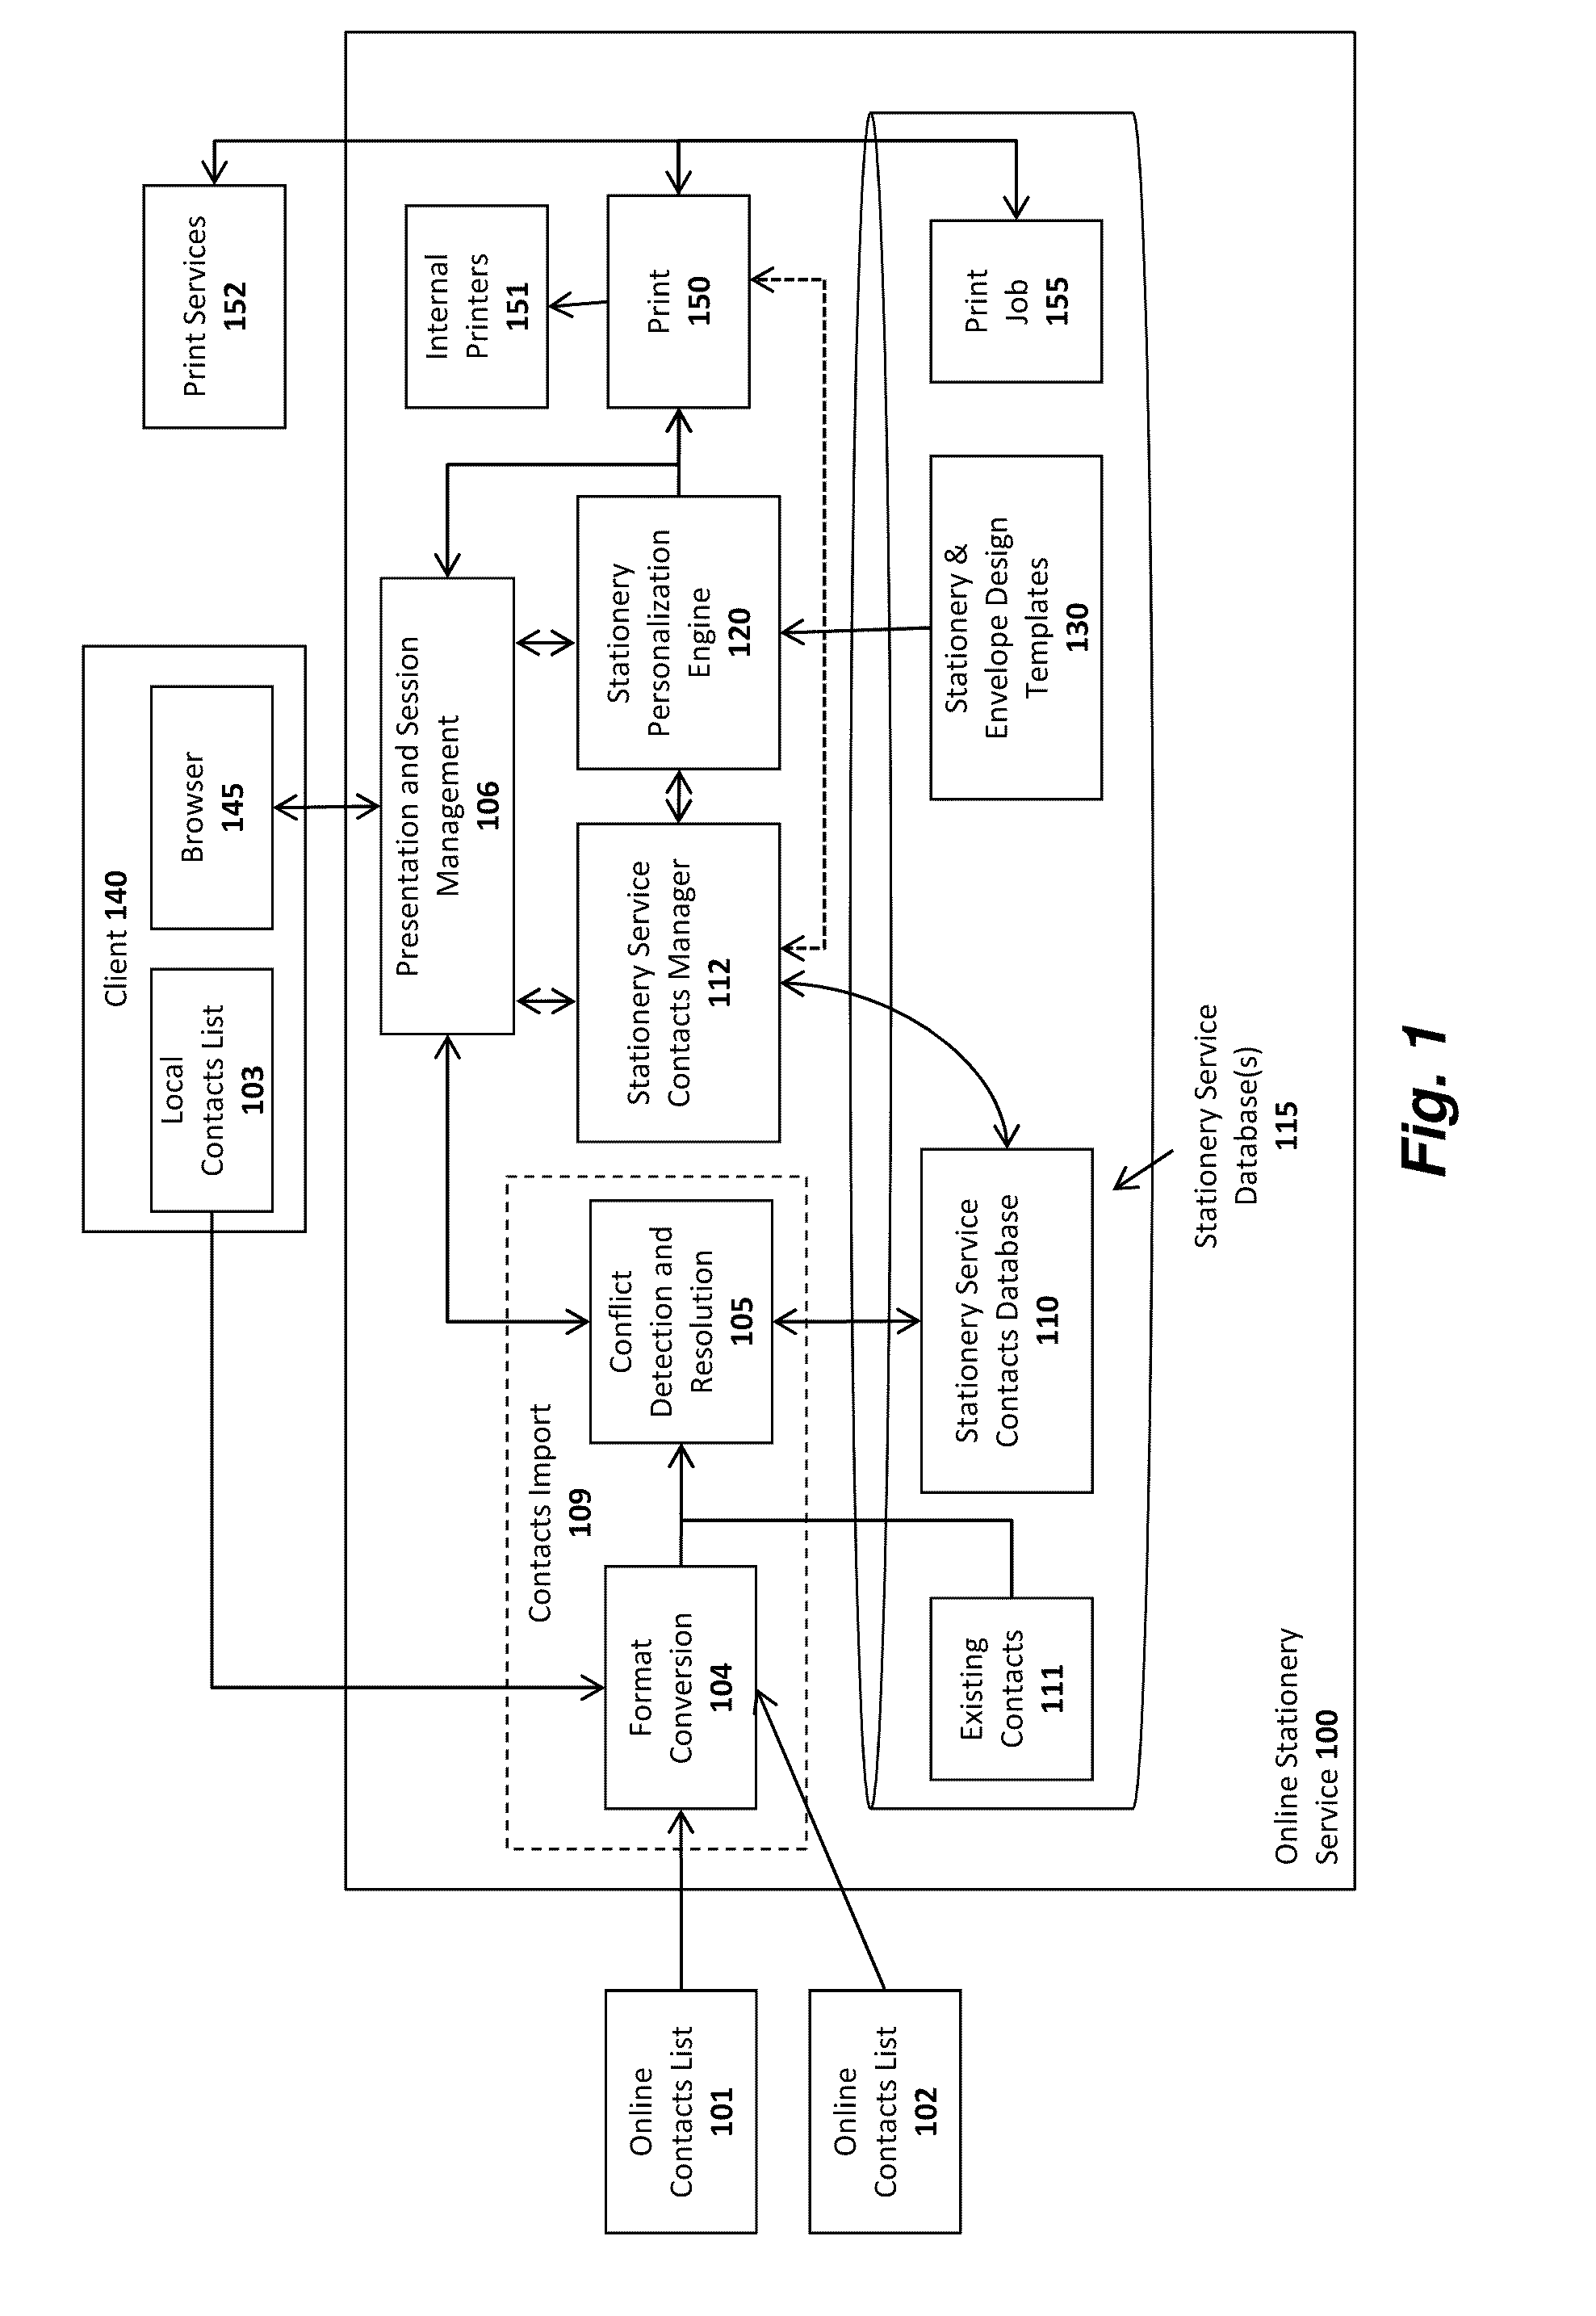 Graphical user interface and method for creating and managing photo stories